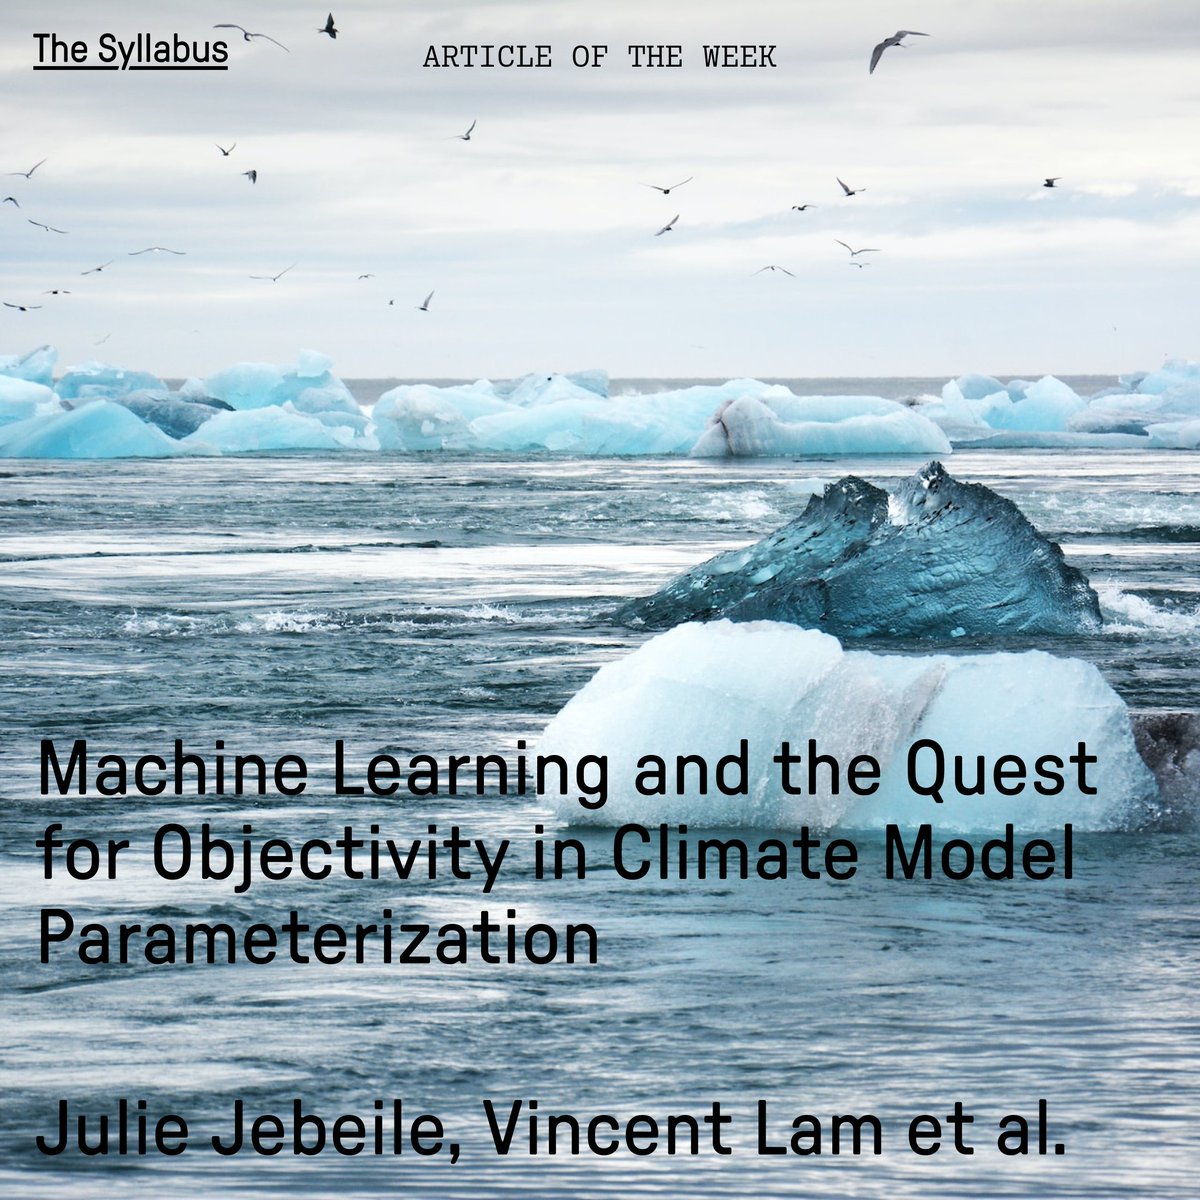 Our Open-Access of the Week dives into the growing use of machine learning techniques in climate modeling. While ML promises a more objective approach, it’s not without its  political challenges.

By @JulieJebeile, Vincent Lam, Mason Majszak & Tim Räz

buff.ly/3Kx3erI